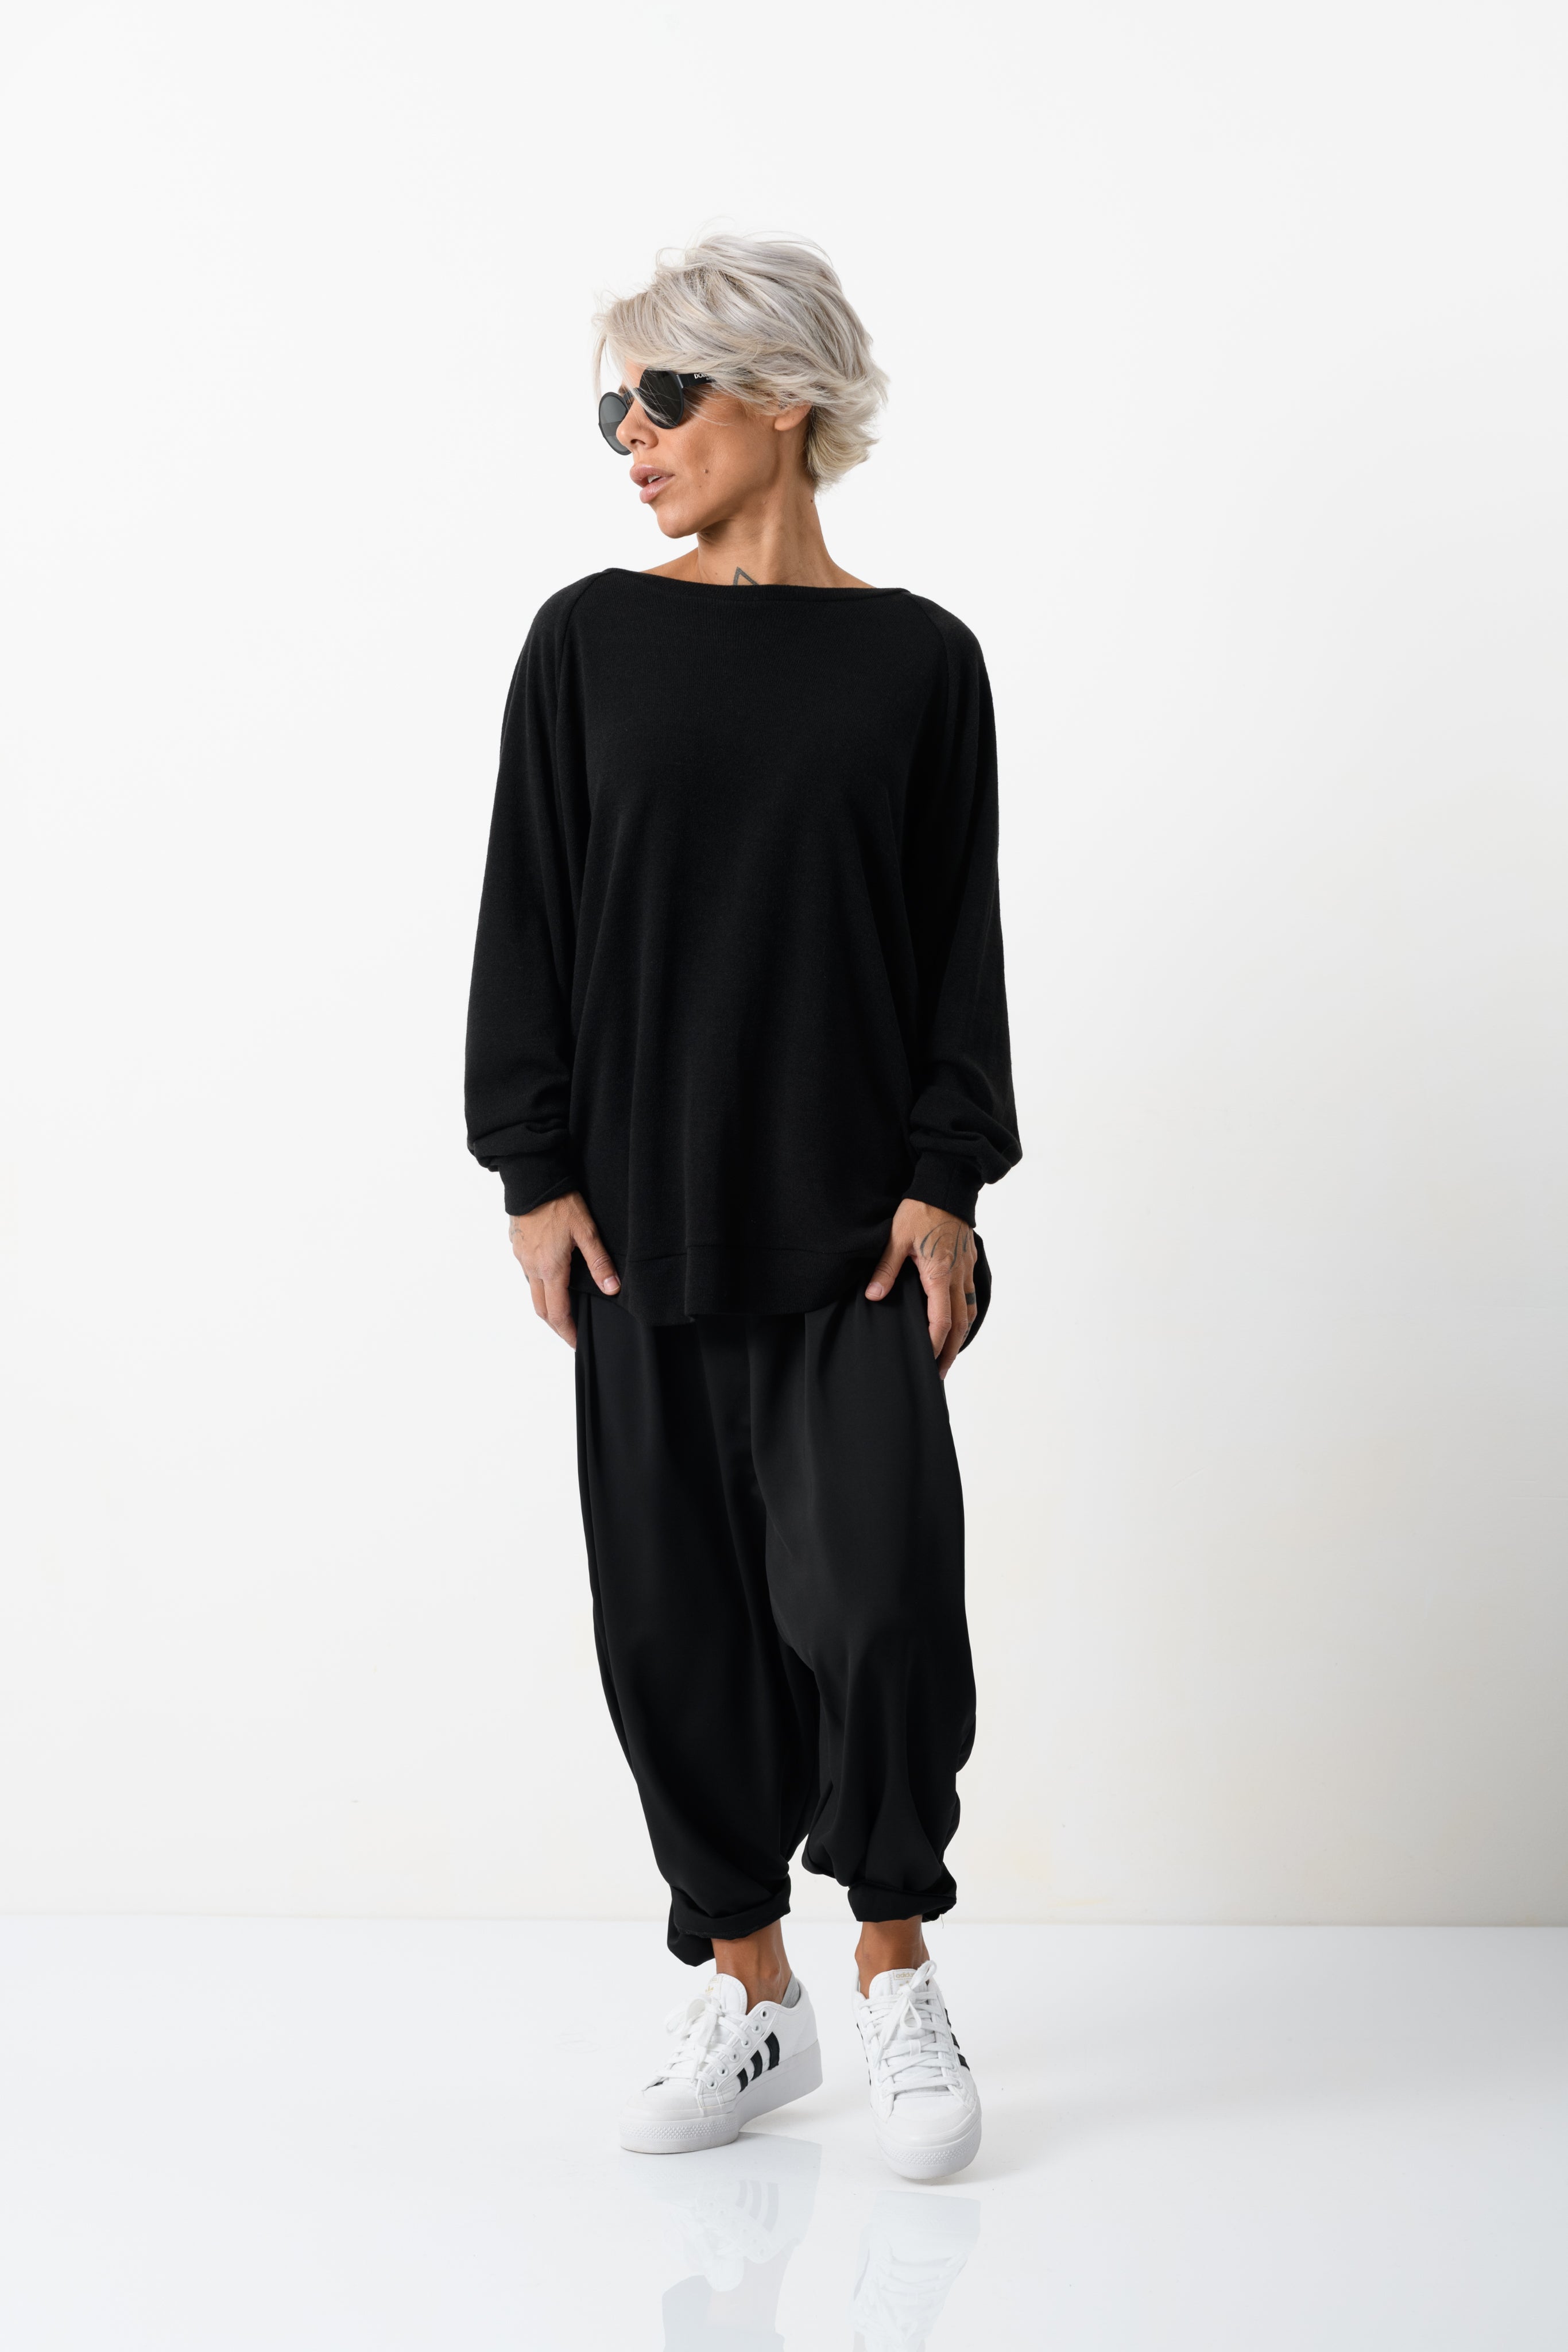 Oversized Knitted Open-Back Top in Black – Clothes By Locker Room